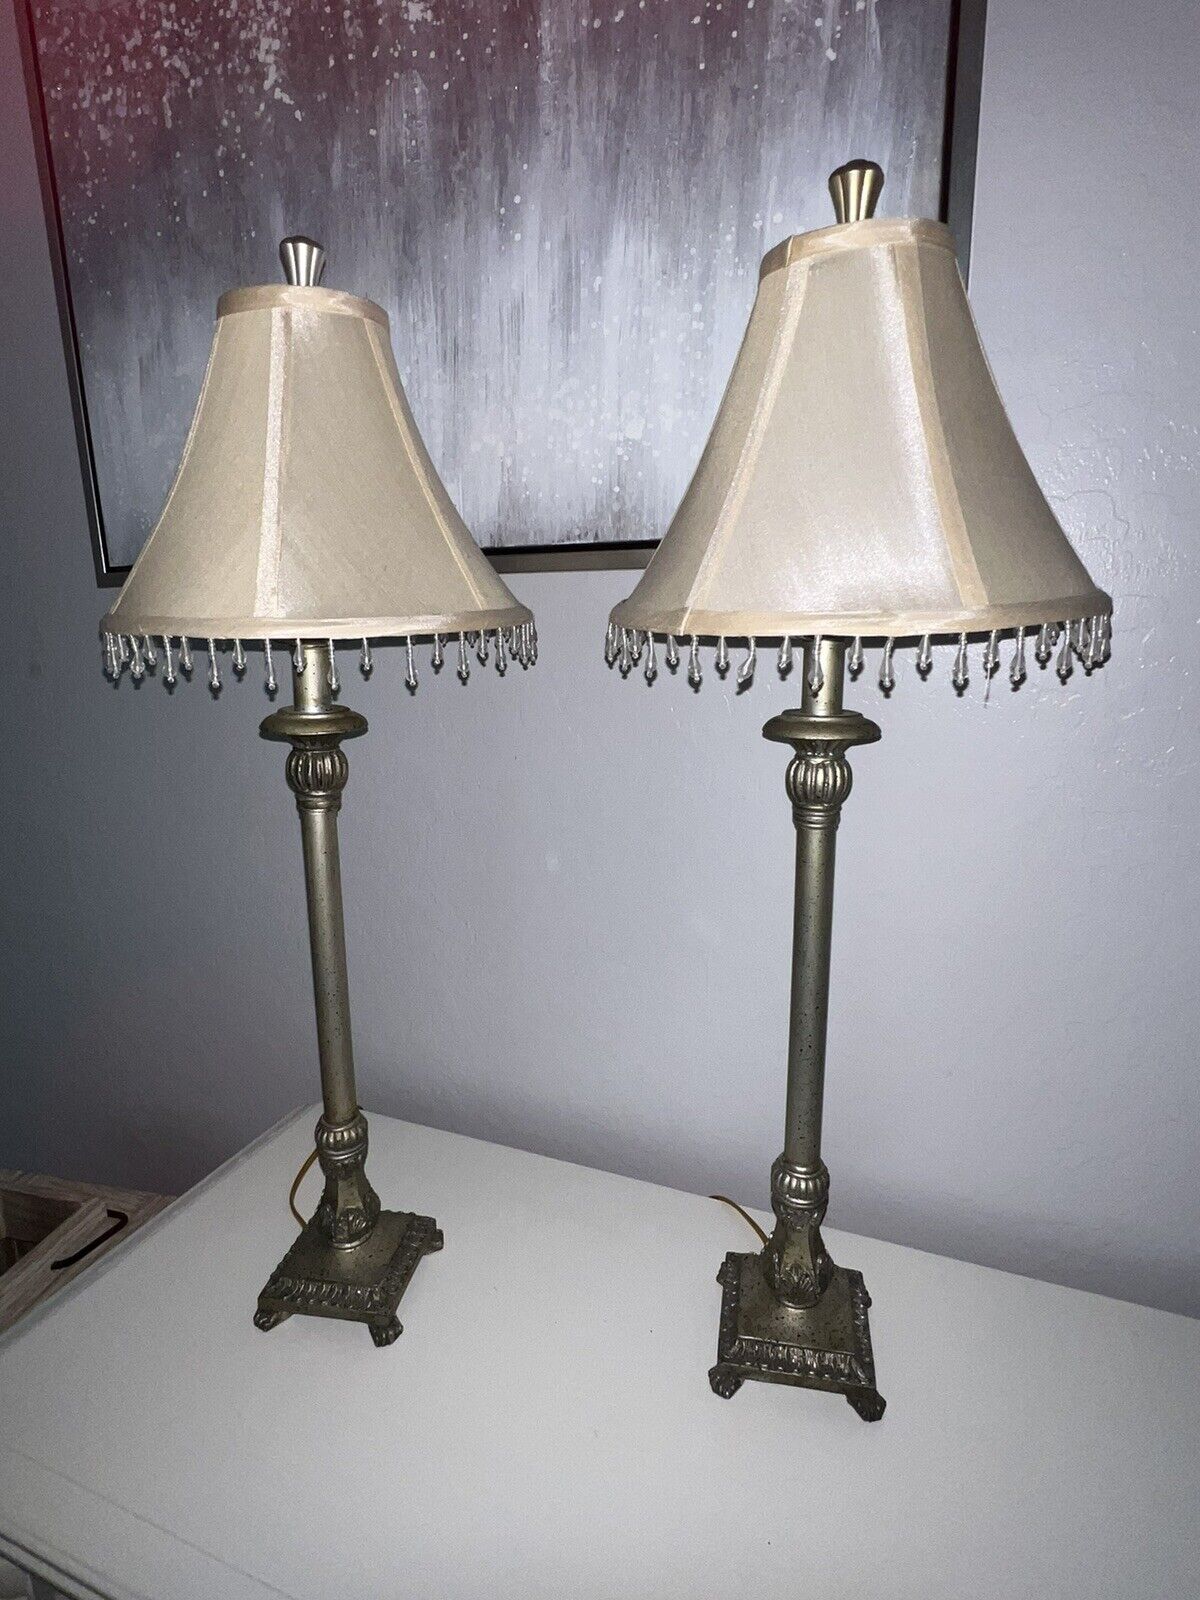 2 Matching Table Lamps 30” Tall